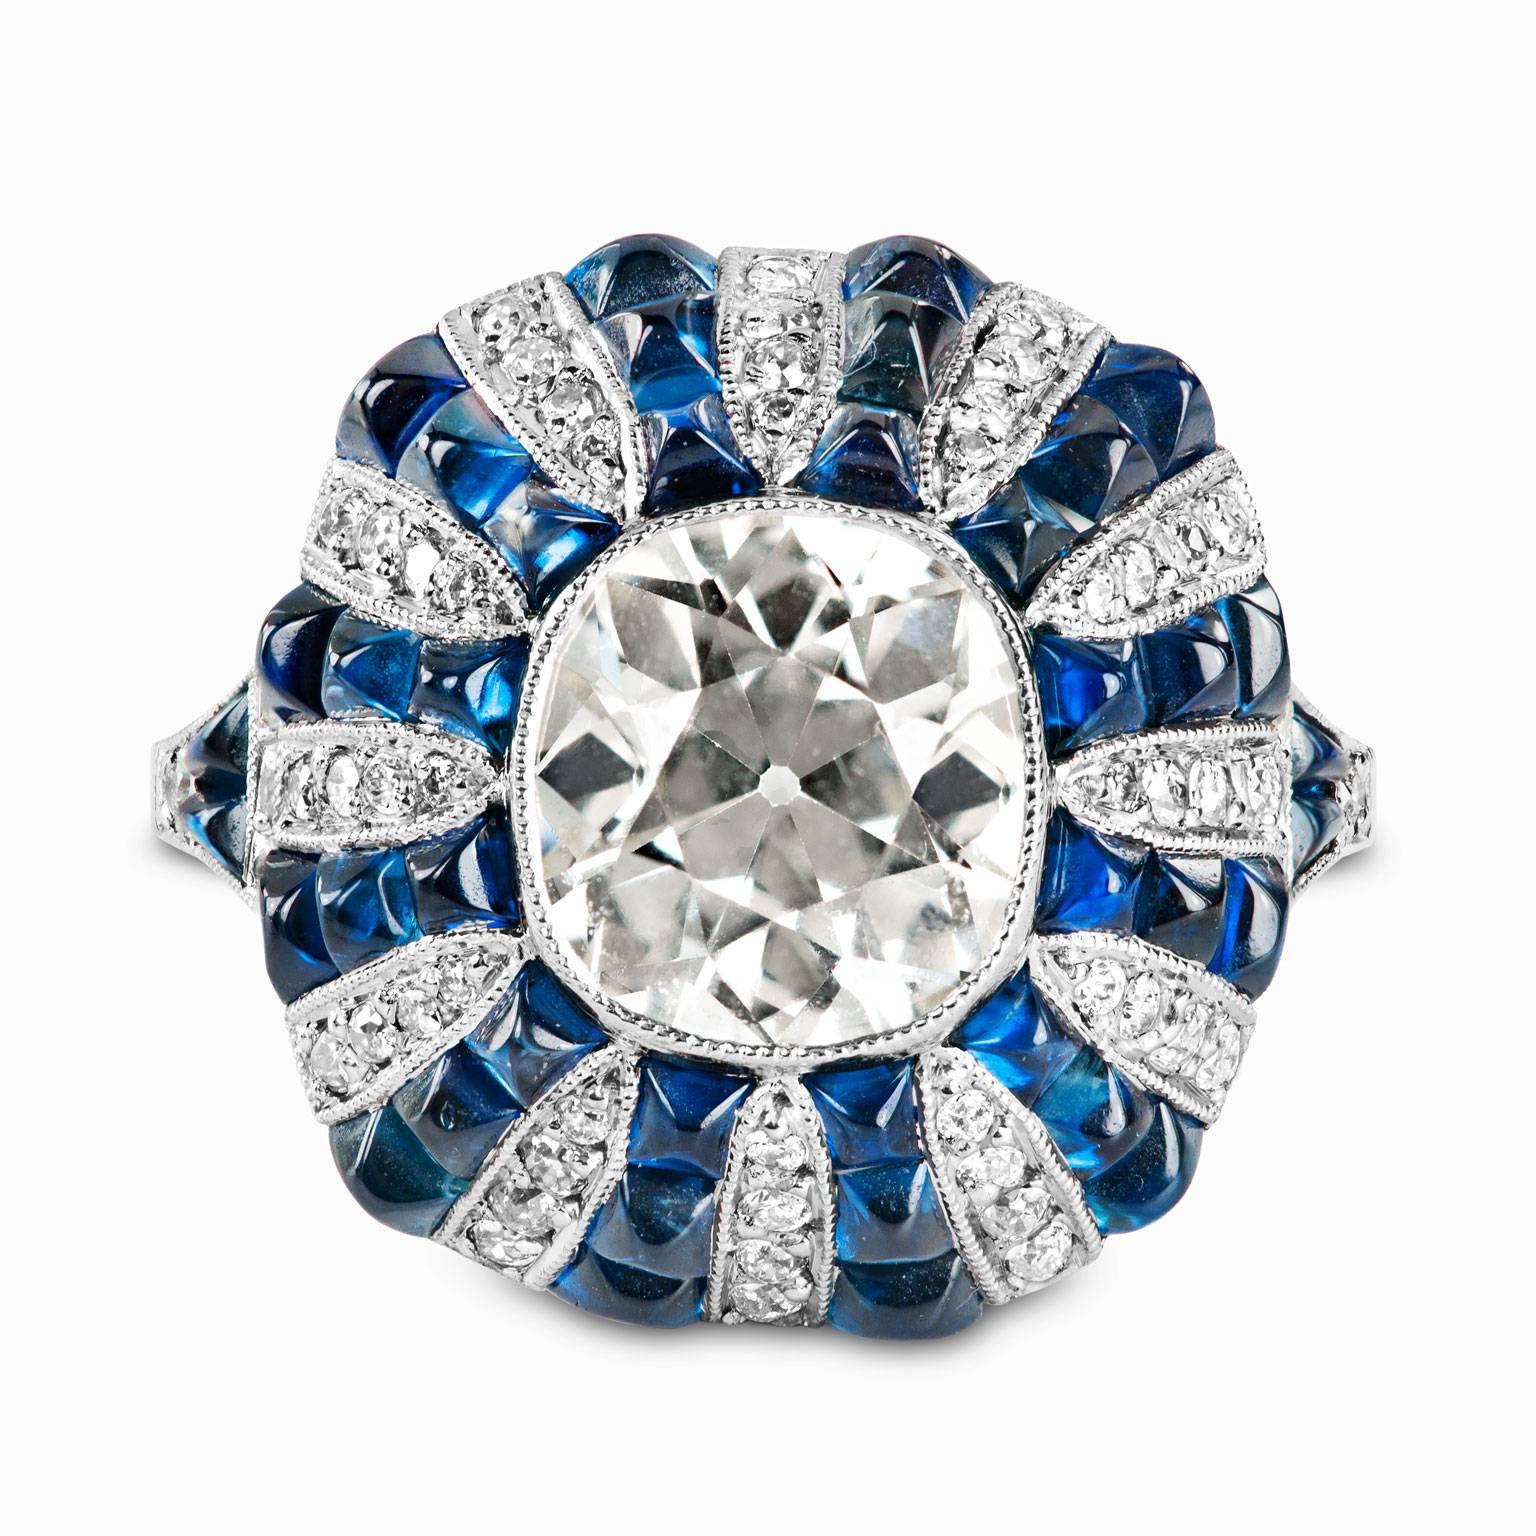 GIA Certified 2.63 Carat Center Diamond with an additional 56 diamonds totaling another .50 Carats. 
The Sapphires are Sugar Loaf Cut.  There are 40 individual stones with the approximate weight of 4 total carats.  

This is a new ring that has an